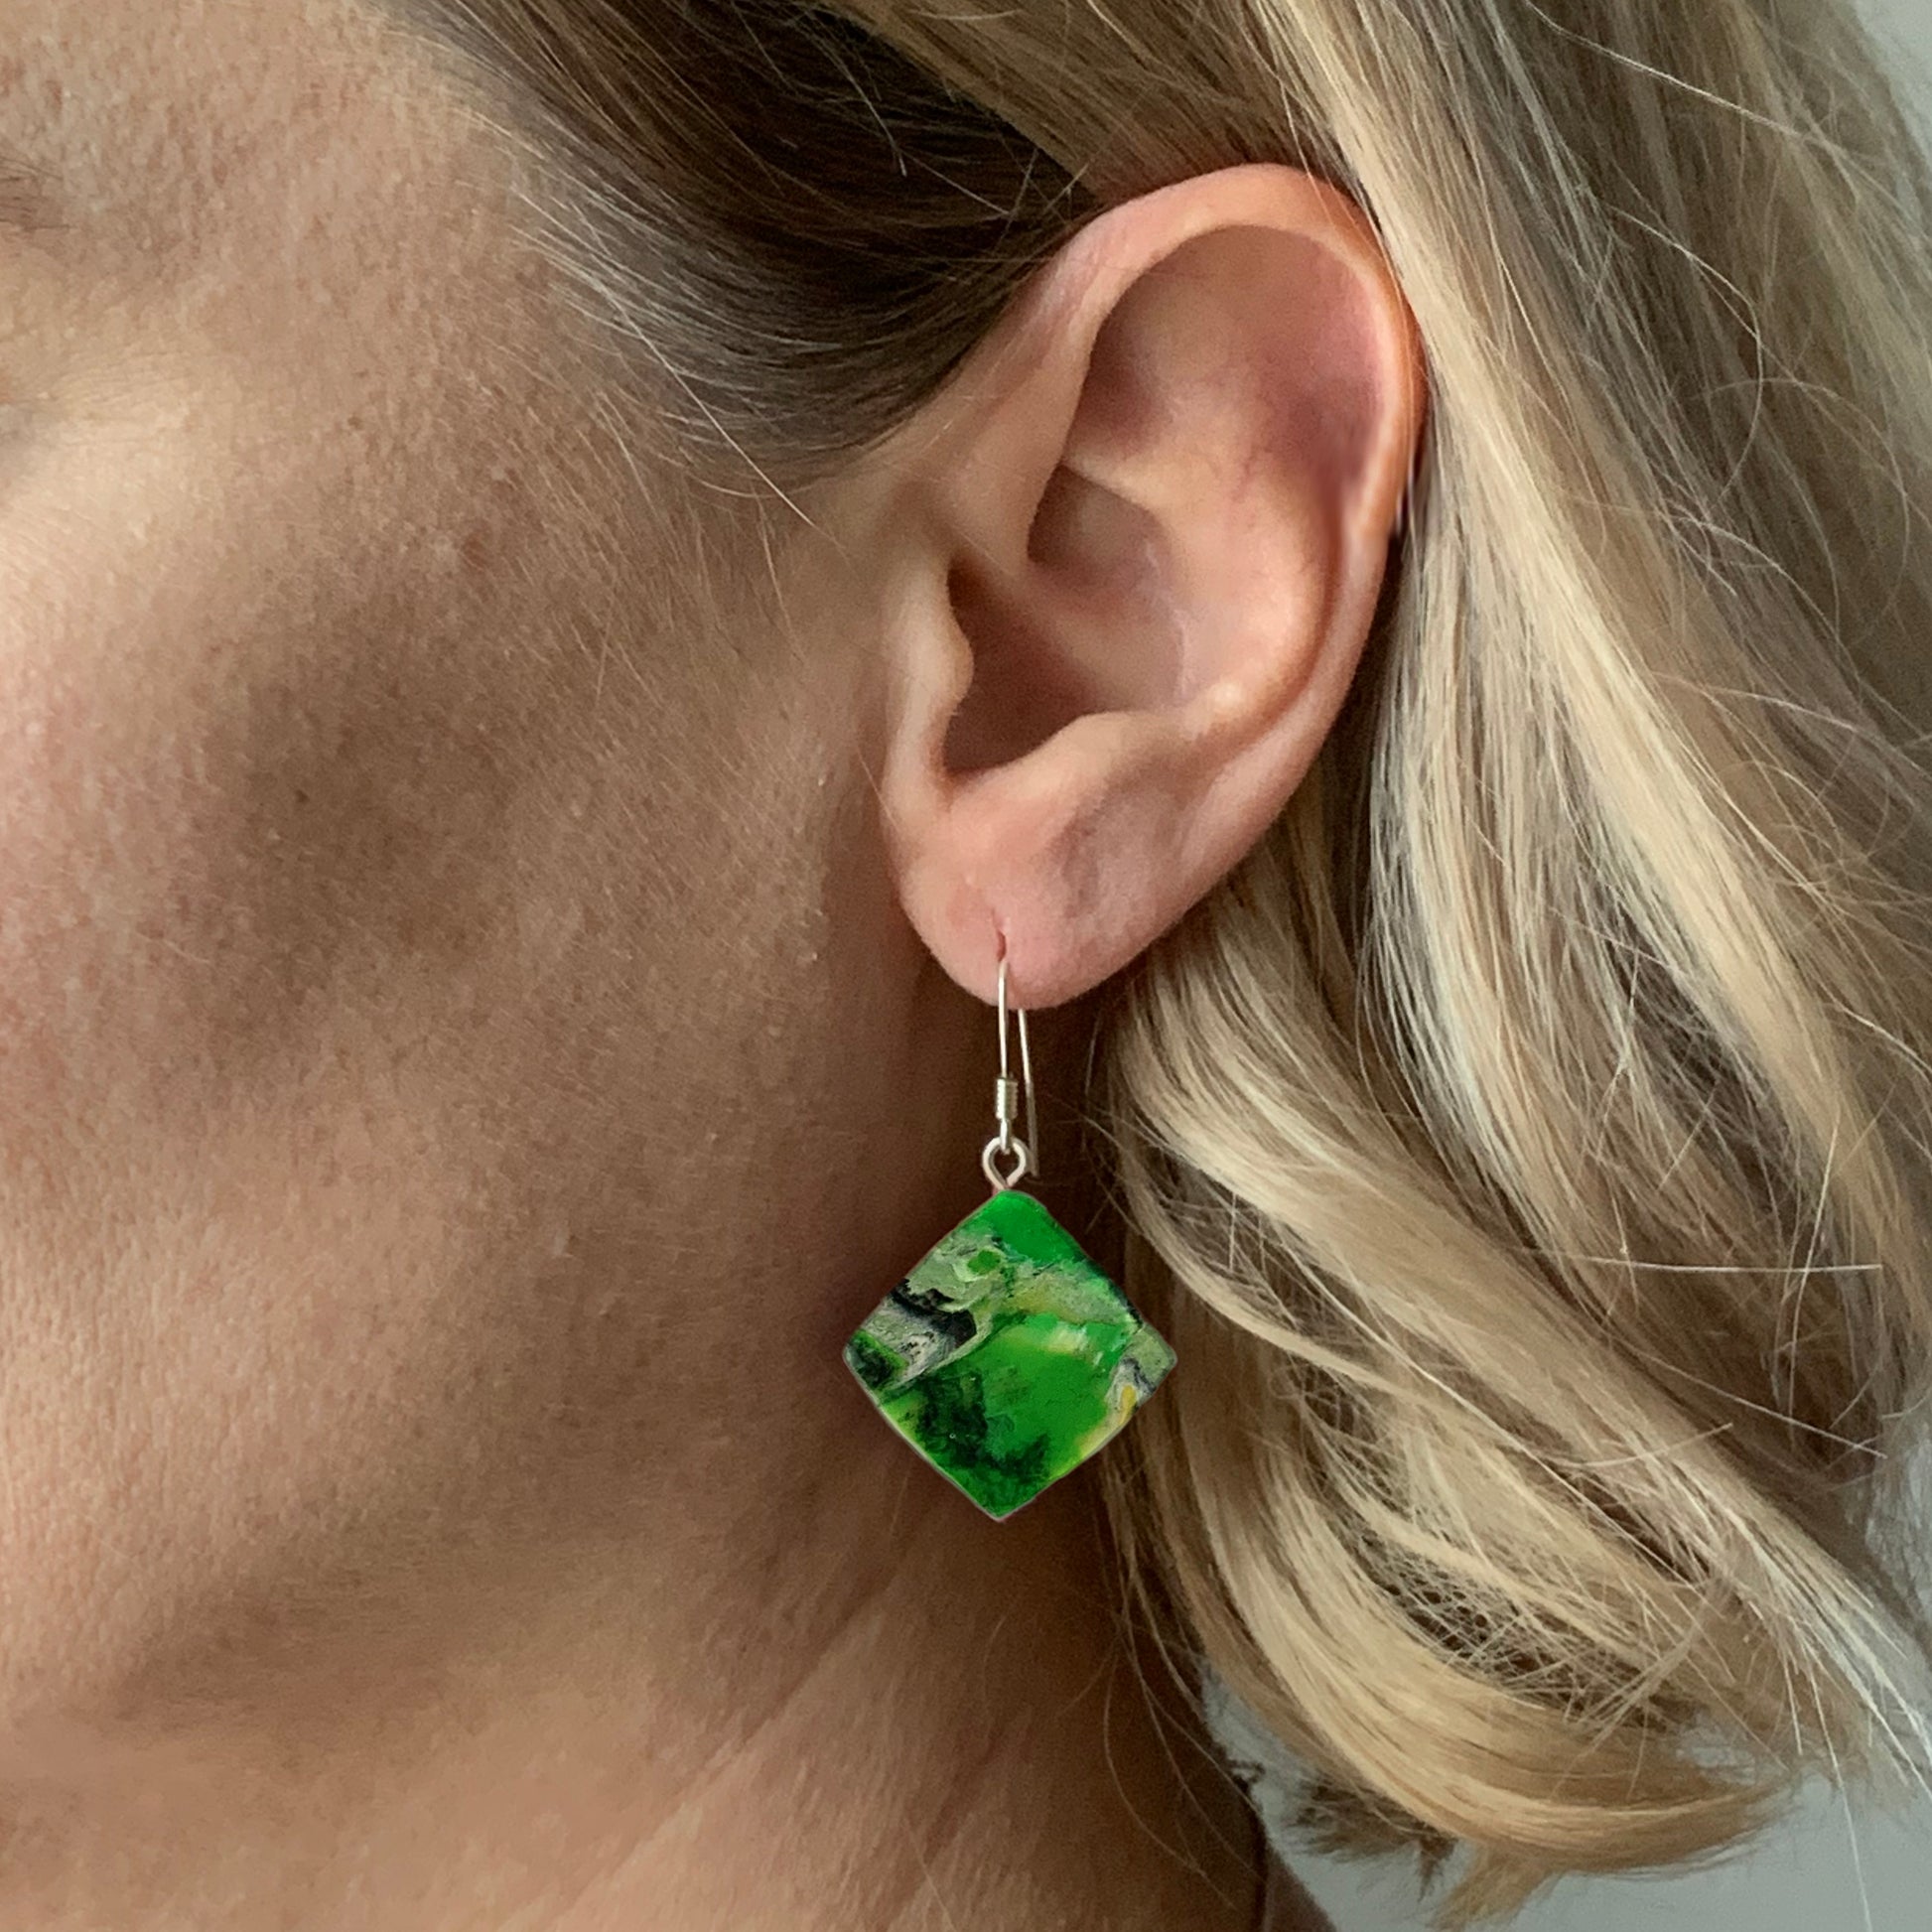 Green earrings made from plastic waste